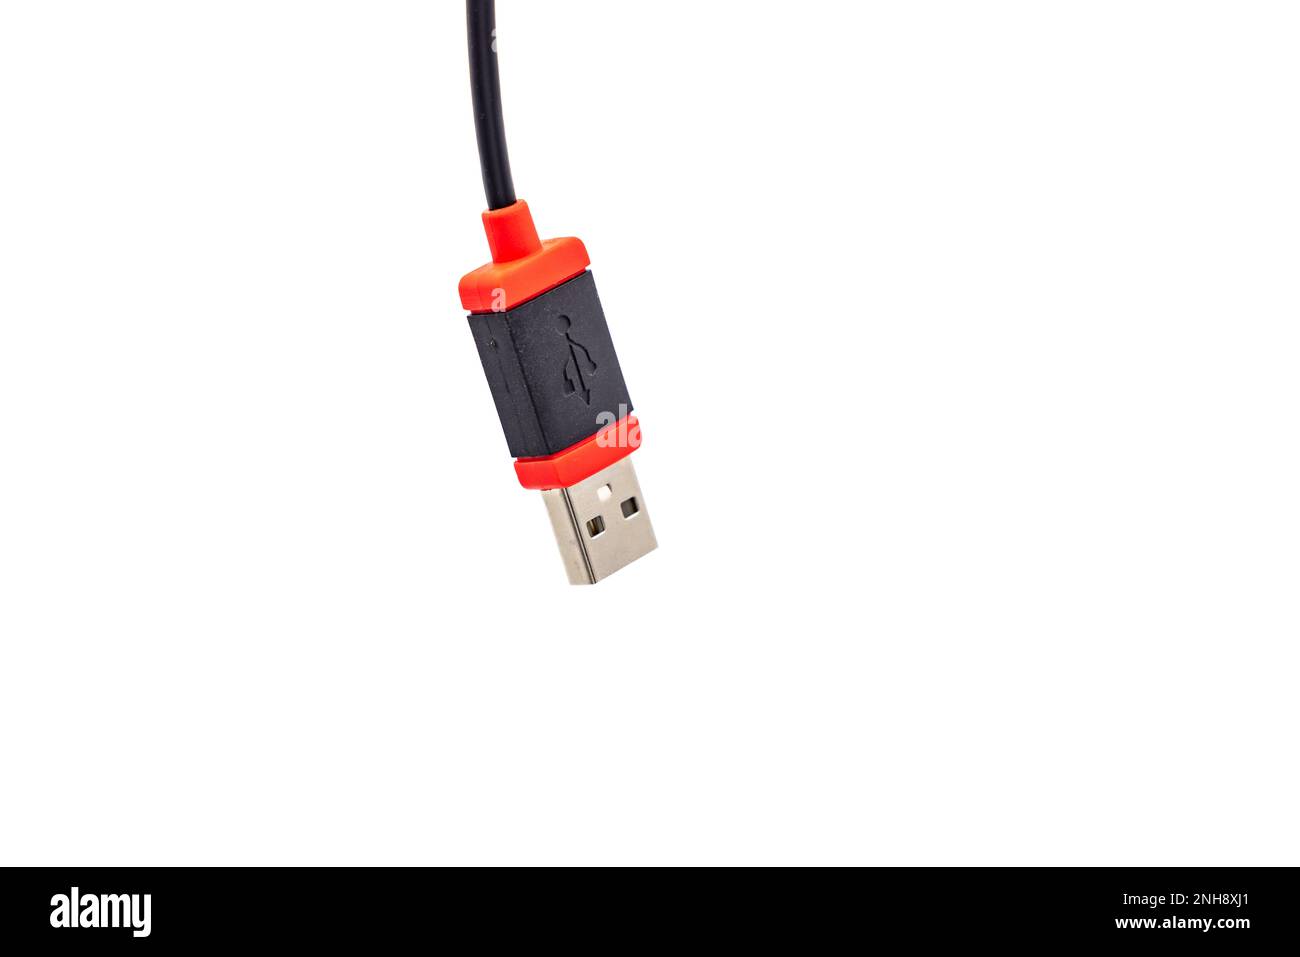 A USB plug type A in red and black cropped against white background as studio shot Stock Photo